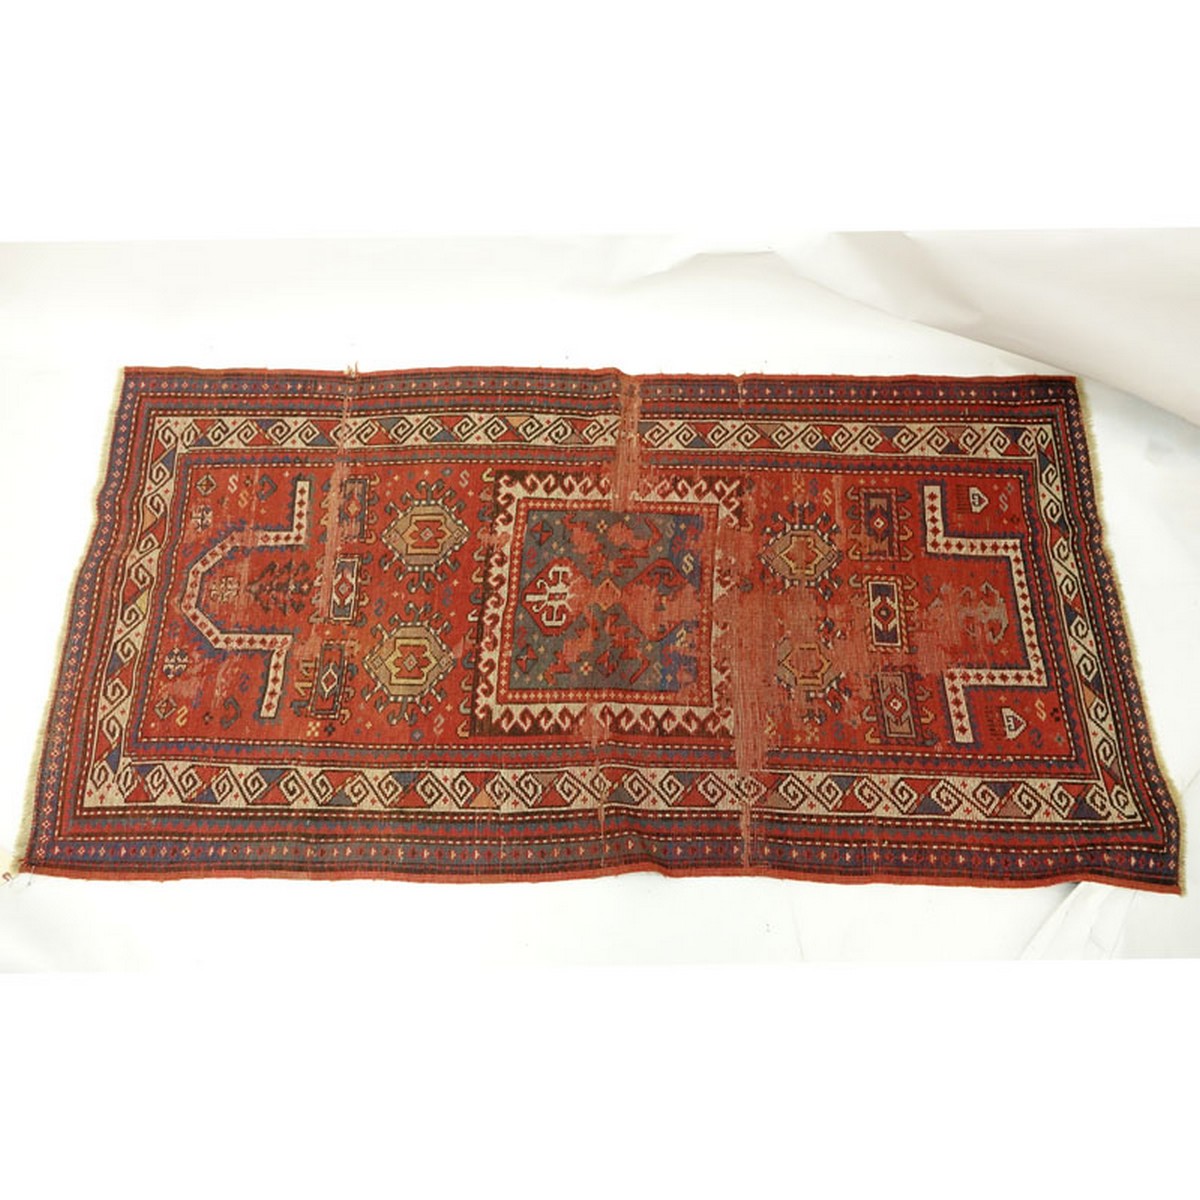 19th Century Caucasian Persian Rug. Unsigned. Quite a bit of wear. Measures 91" x 47". Shipping $75 - Image 3 of 3